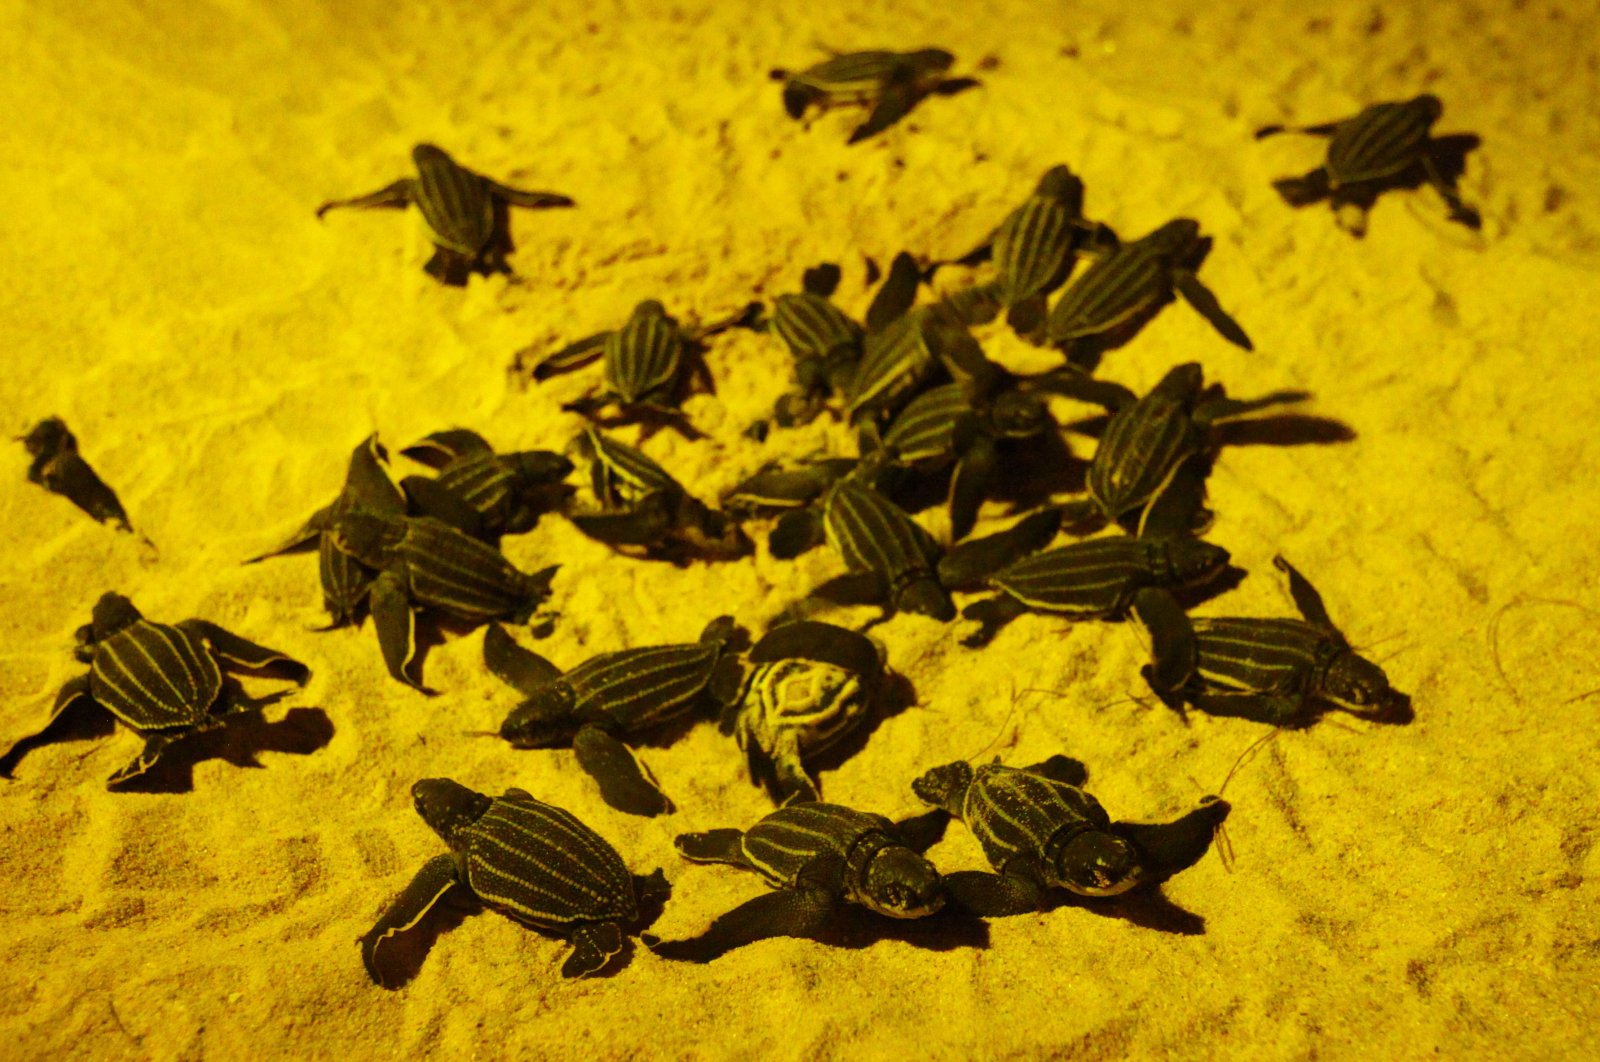 Newly hatched baby leatherback sea turtles are seen before making their way into the sea for the first time at a beach in Phanga Nga district, Thailand, March 27, 2020. (Reuters Photo)